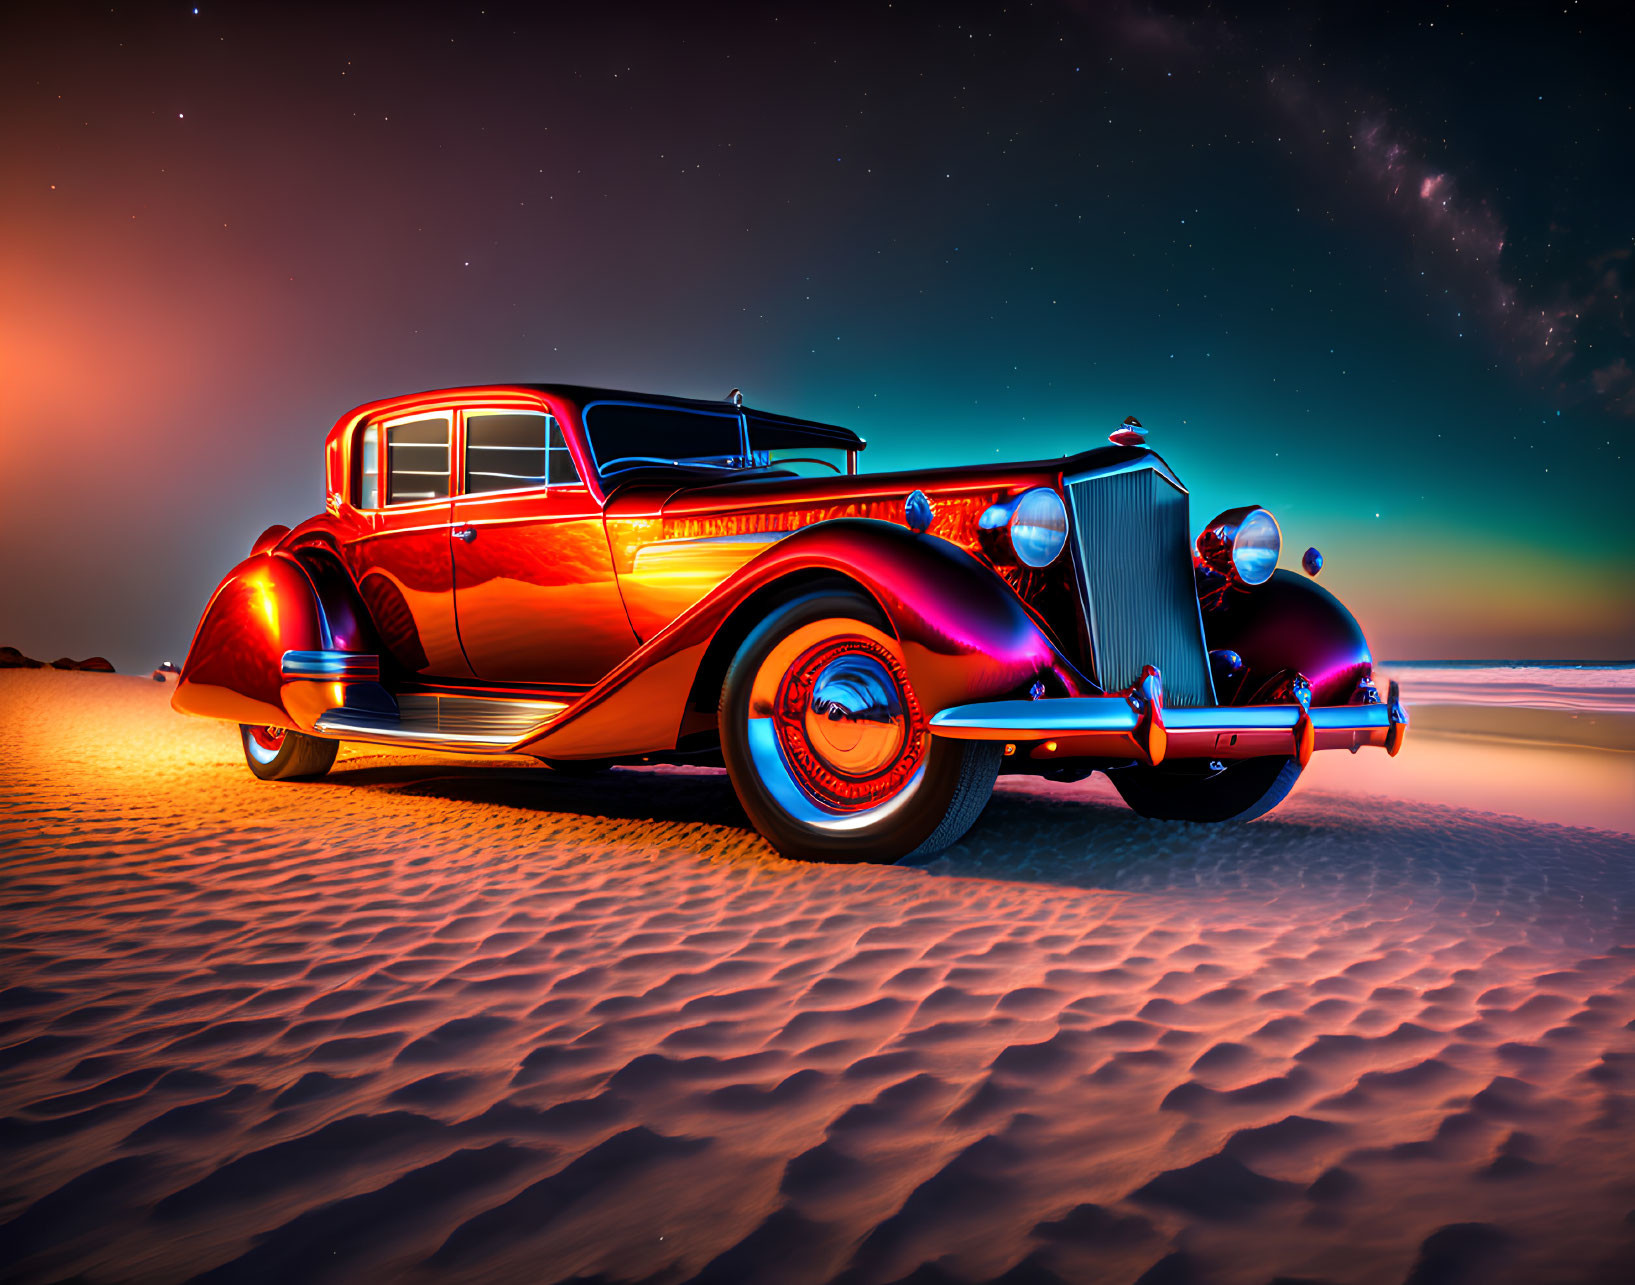 Vintage Car on Sandy Beach at Twilight with Colorful Sky & Northern Lights